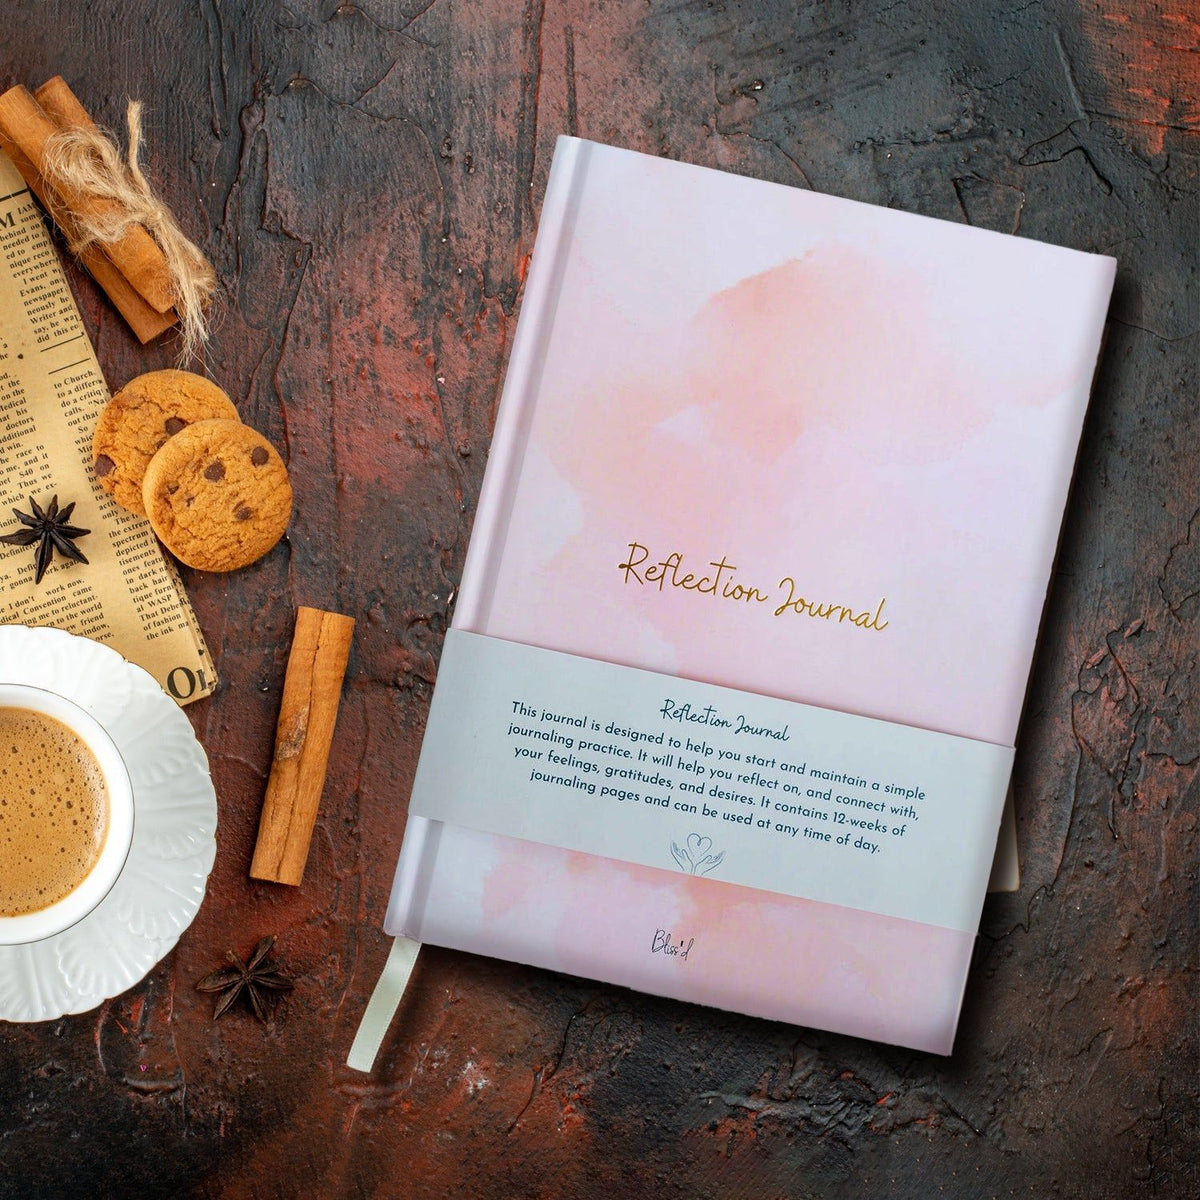 Anytime Reflection Journal: A 5-Minute Gratitude Journal